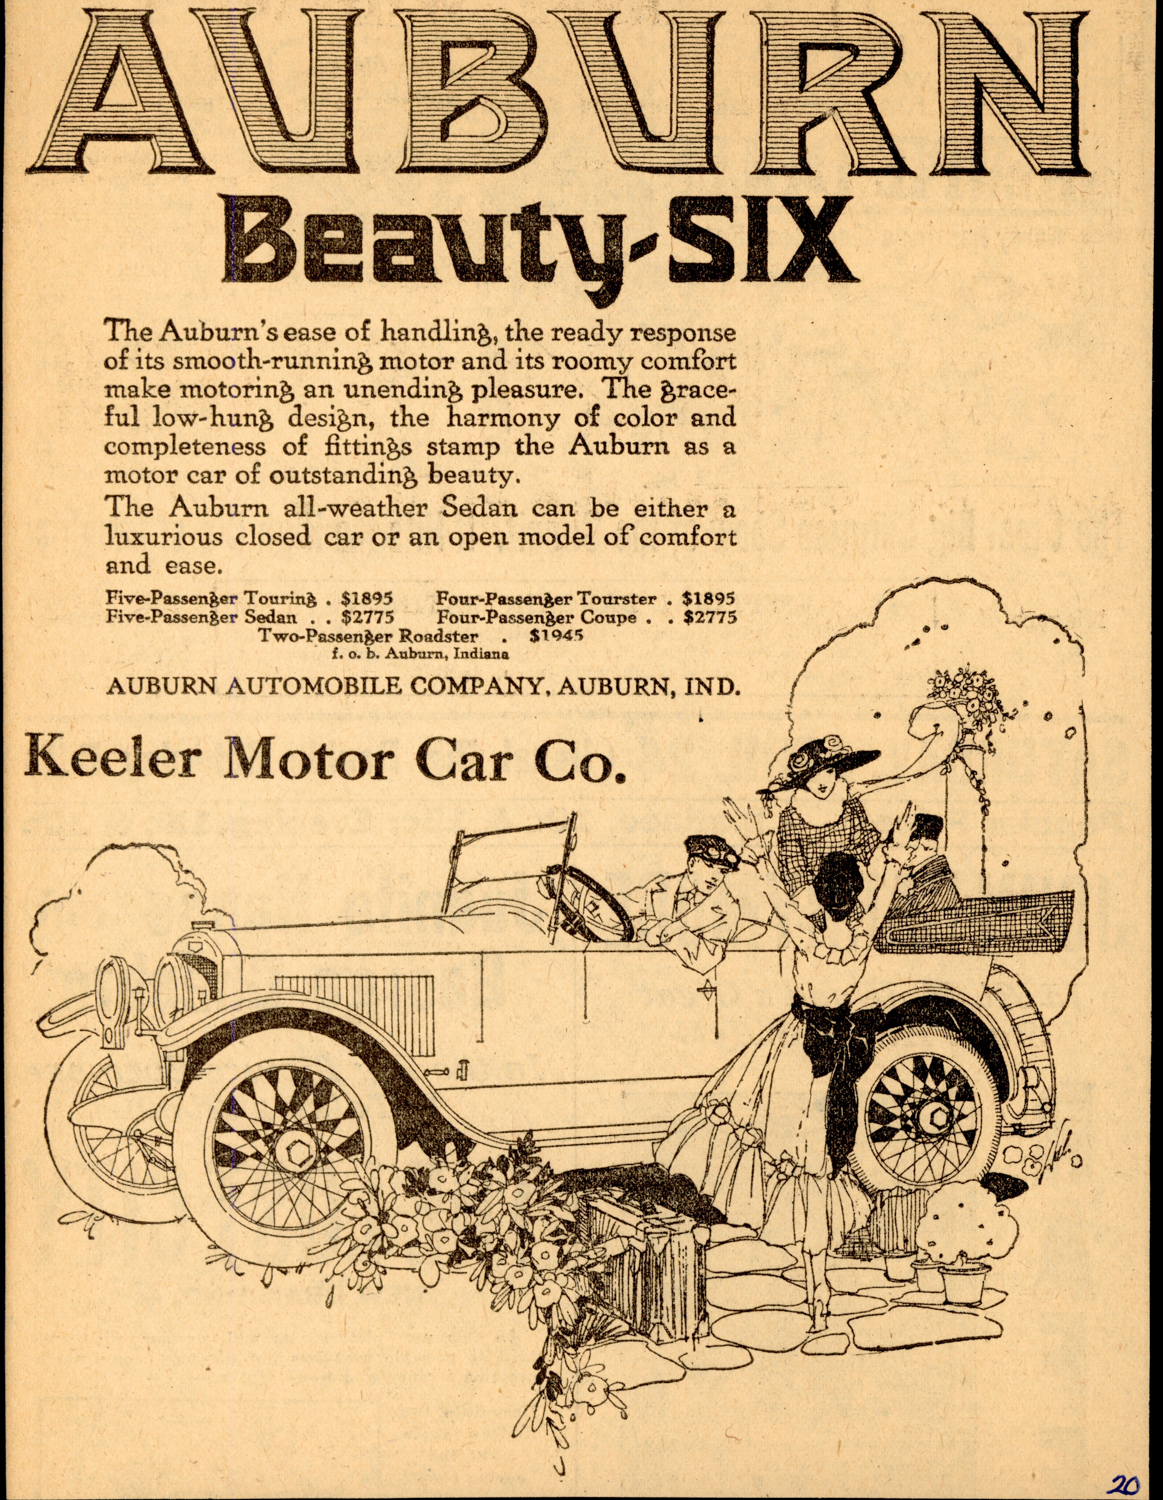 The "Beauty Six" was a mucn improved Auburn for 1920. 